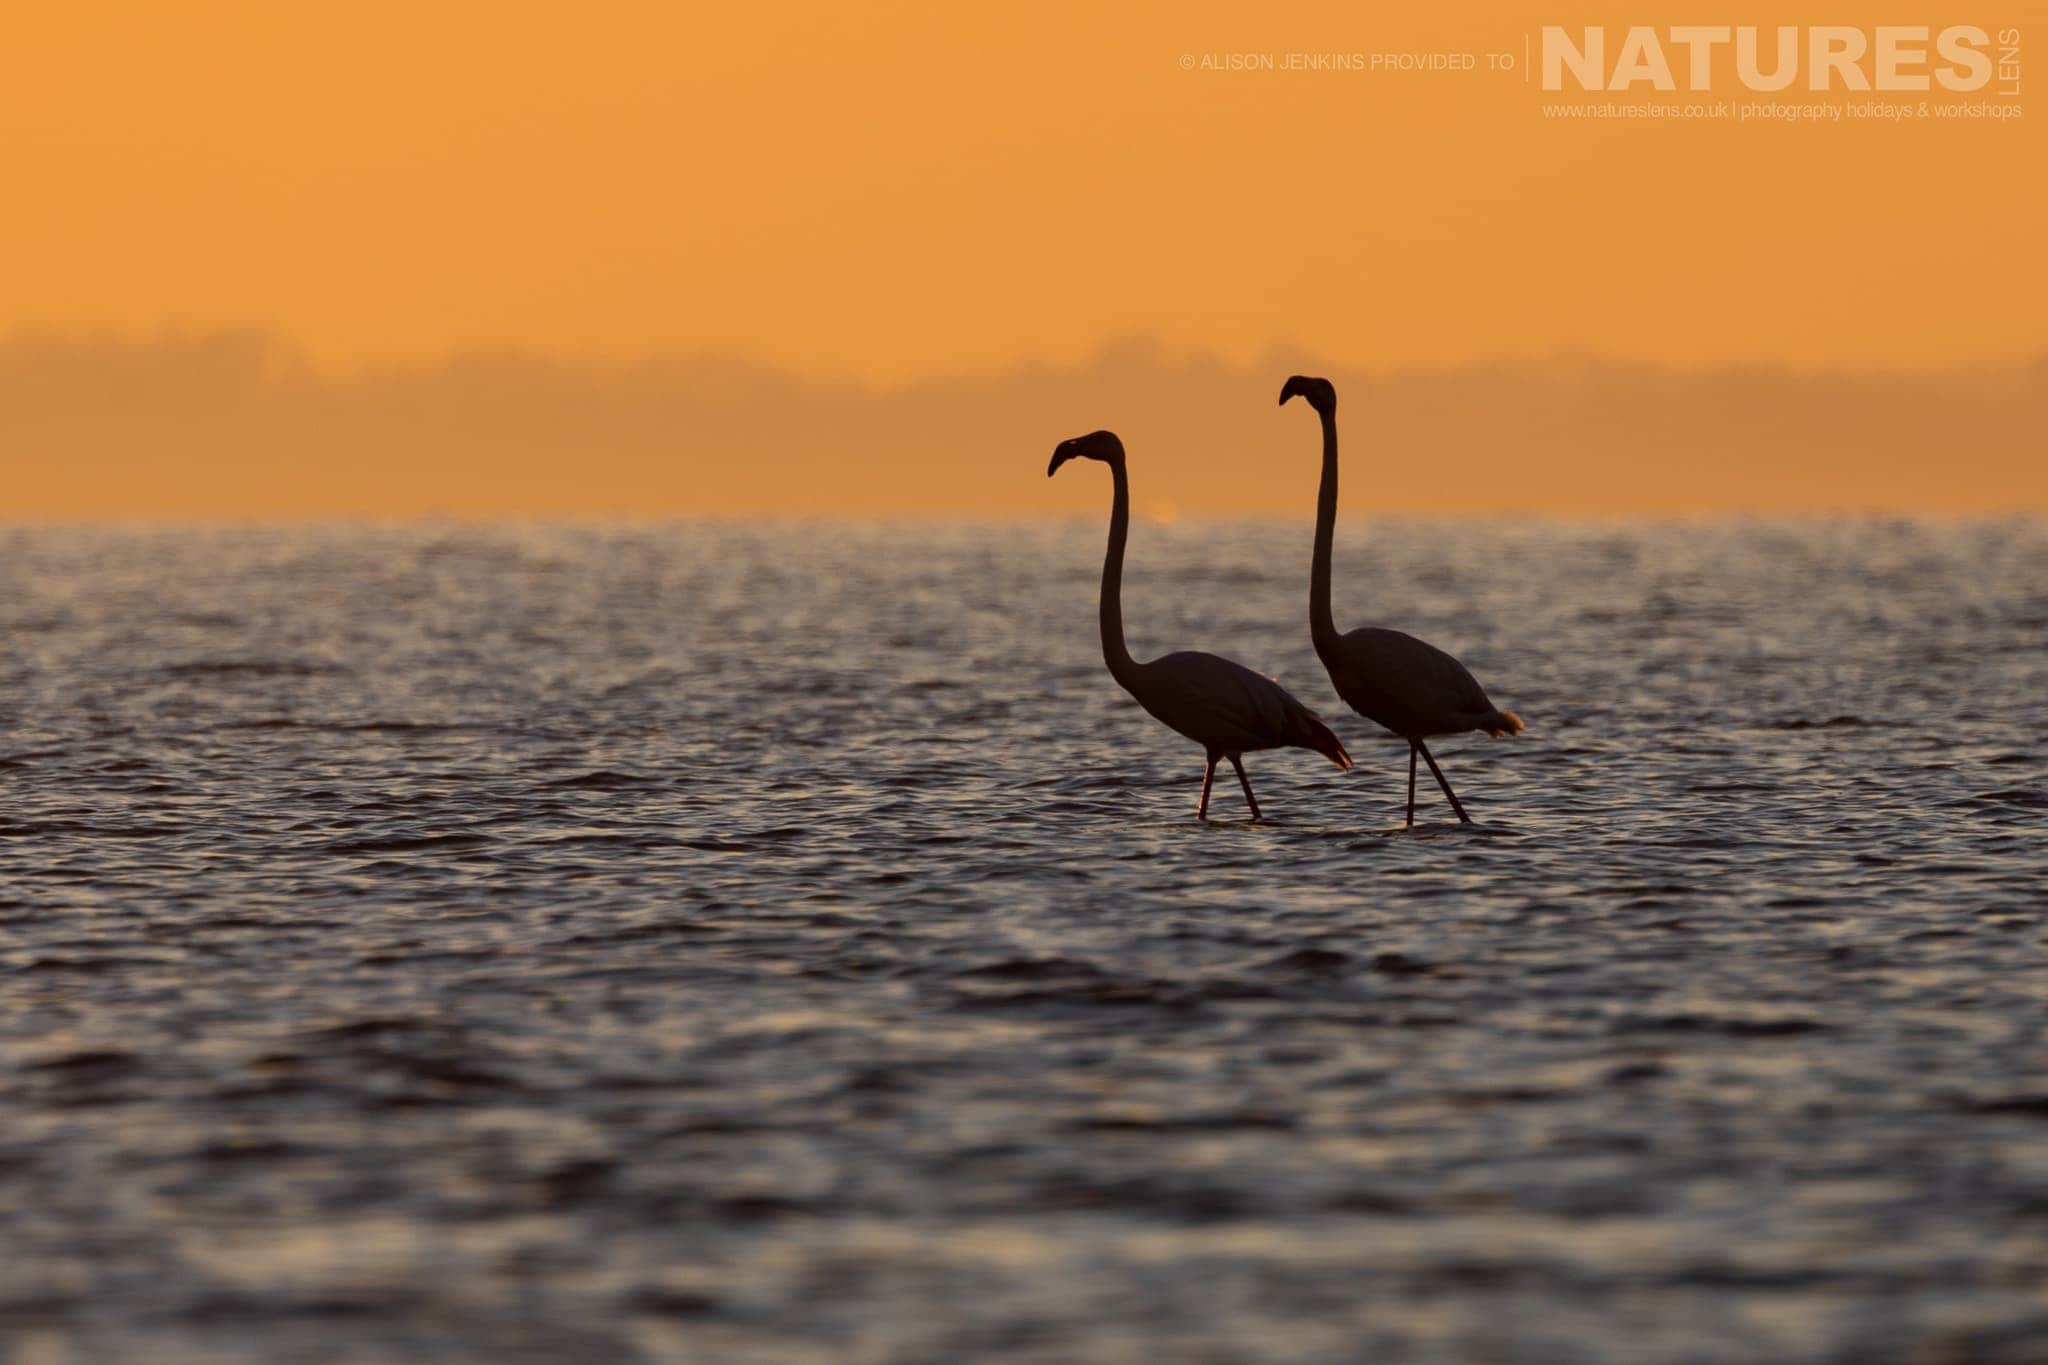 A Pair Of Flamingos Stride Through The Shallow Waters Of The Lake Photographed During A Natureslens Wildlife Photography Holiday